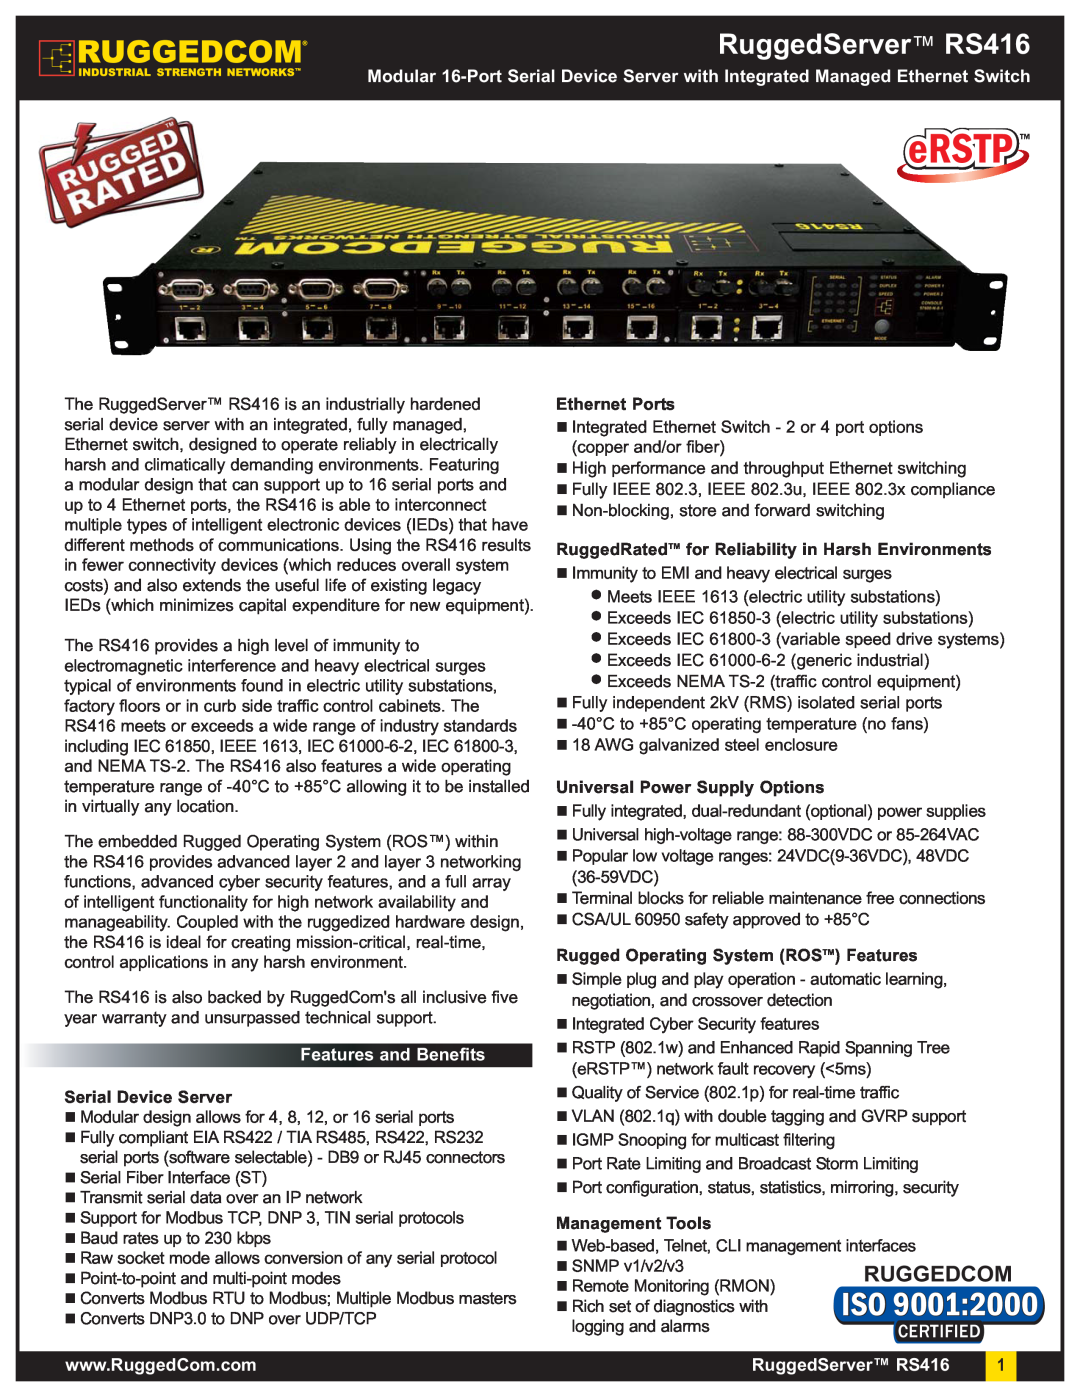 RuggedCom warranty RuggedServer RS416, Features and Benefits, Serial Device Server, Ethernet Ports, Management Tools 